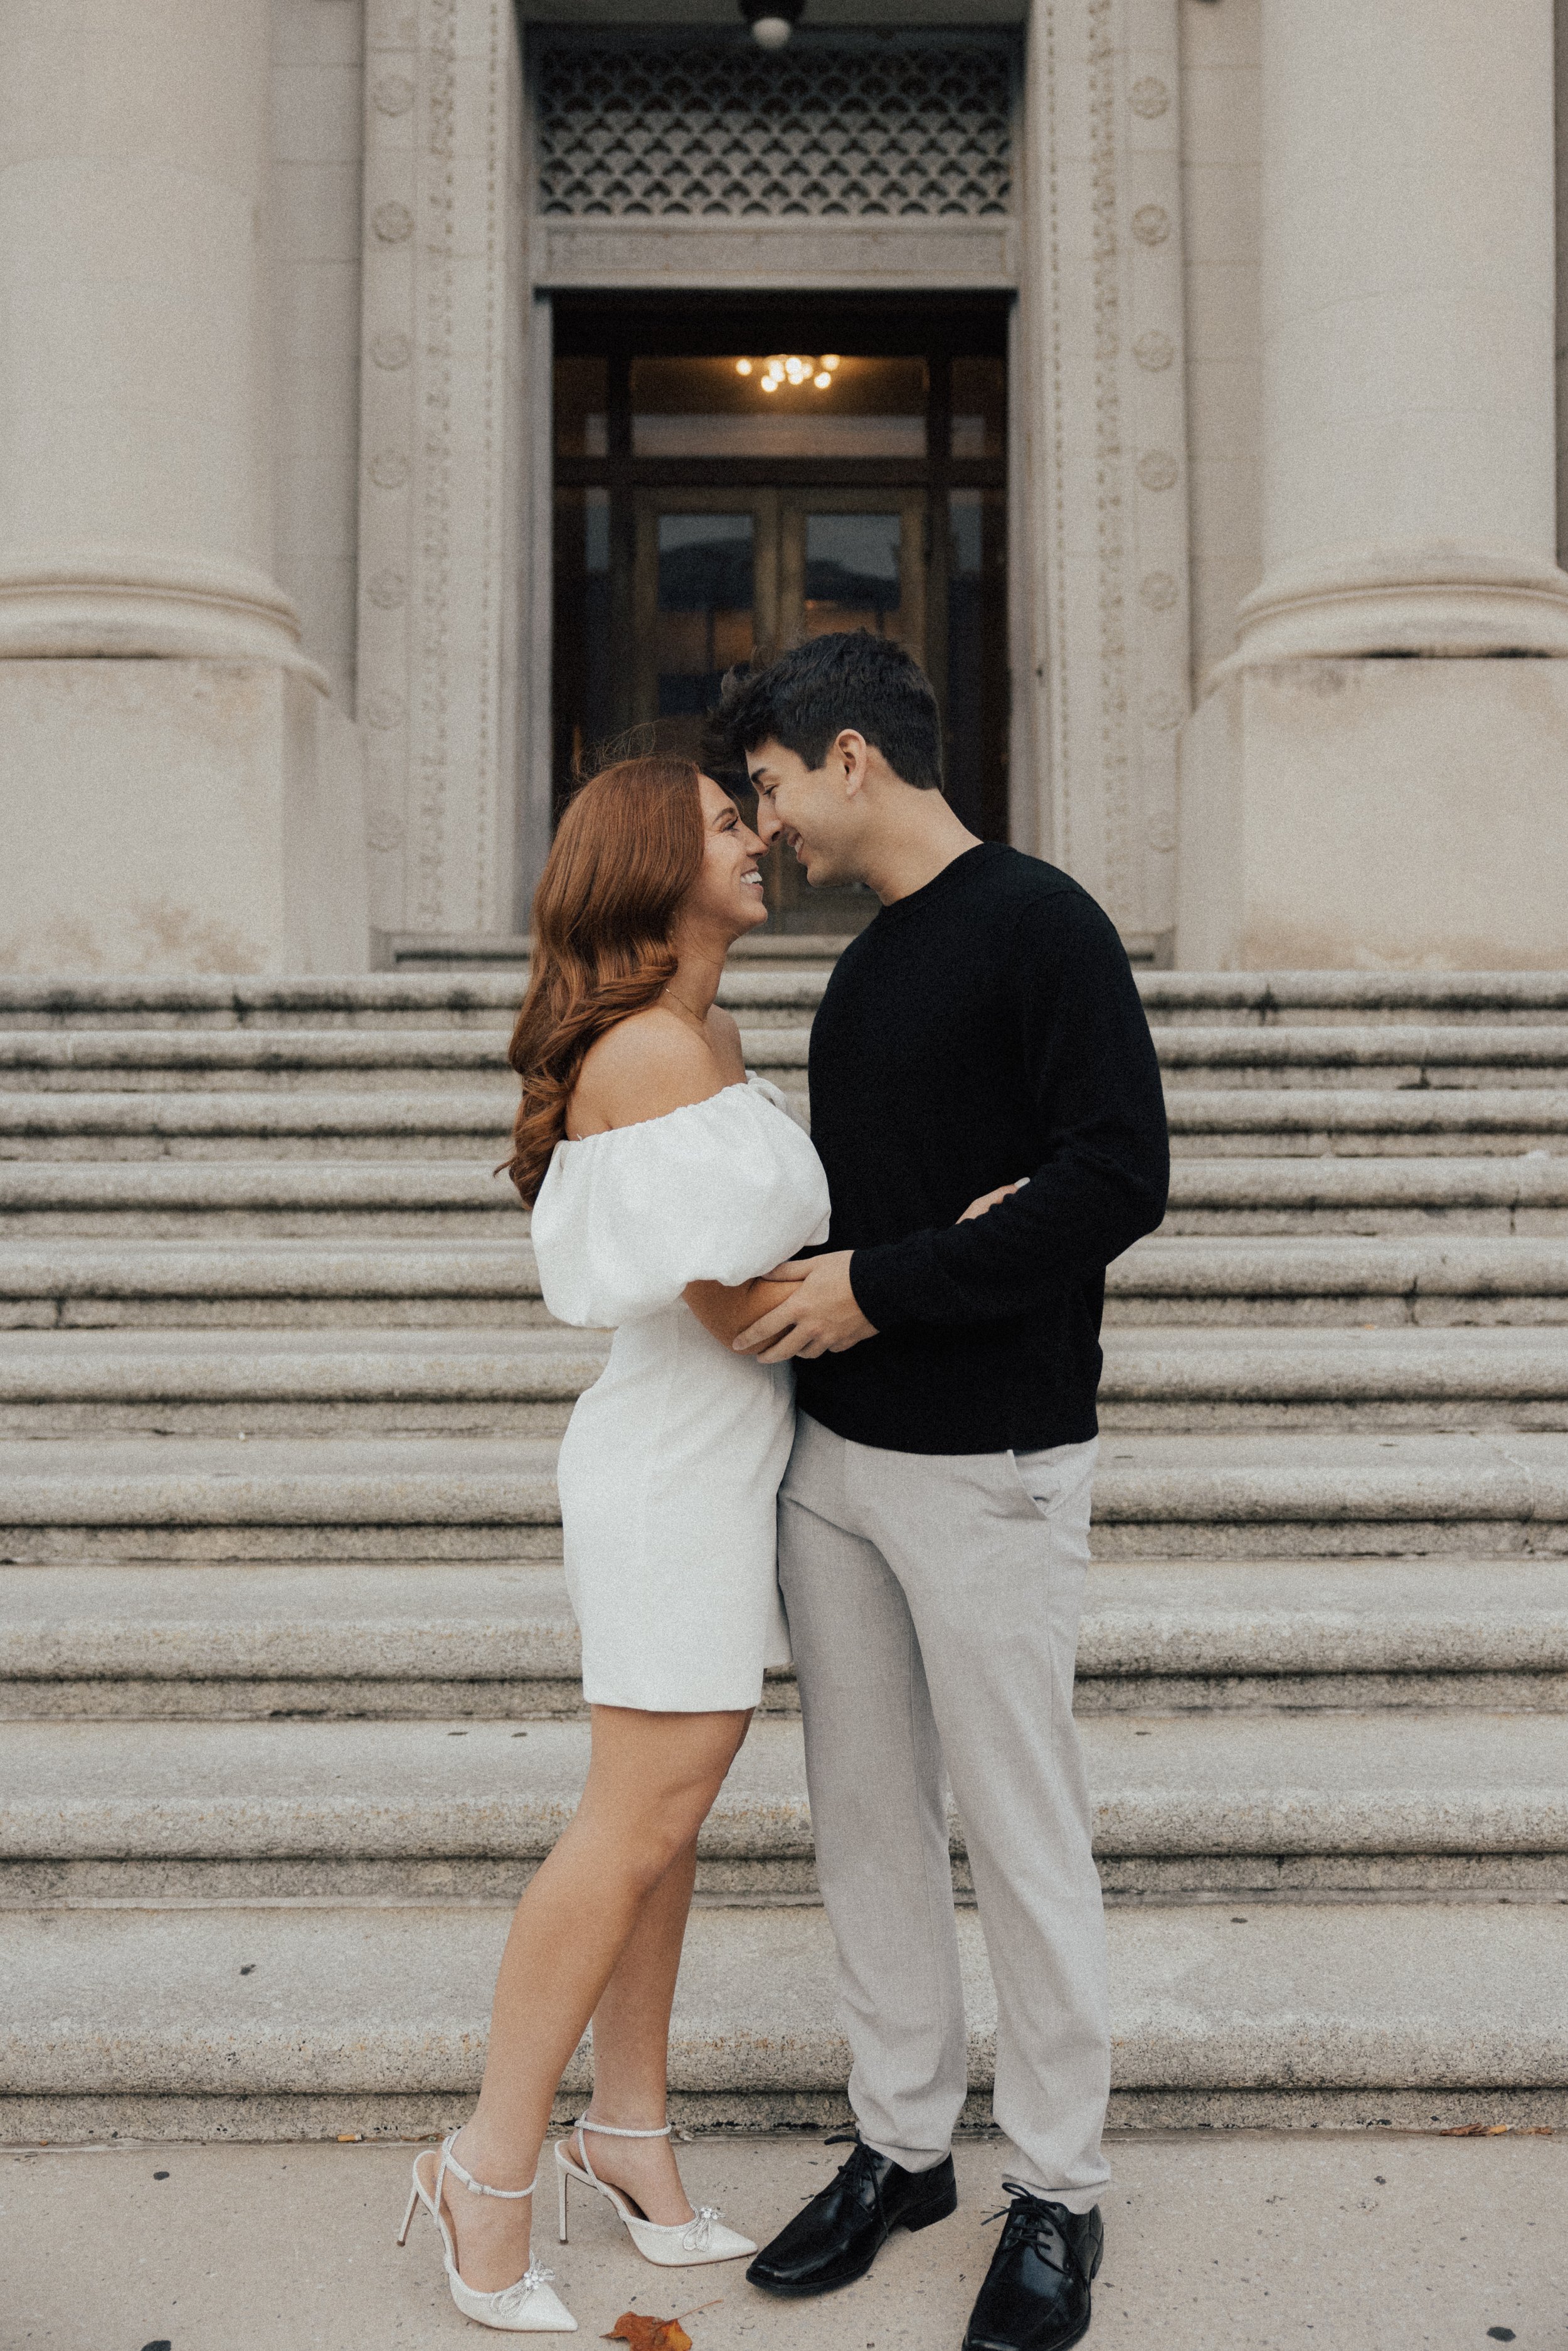 jill-and-jeffrey-winter-engagement-session-hotel-napoleon-courthouse-downtown-memphis-arkansas-tennessee-wedding-photographer-jo-darling-photography-4.jpg